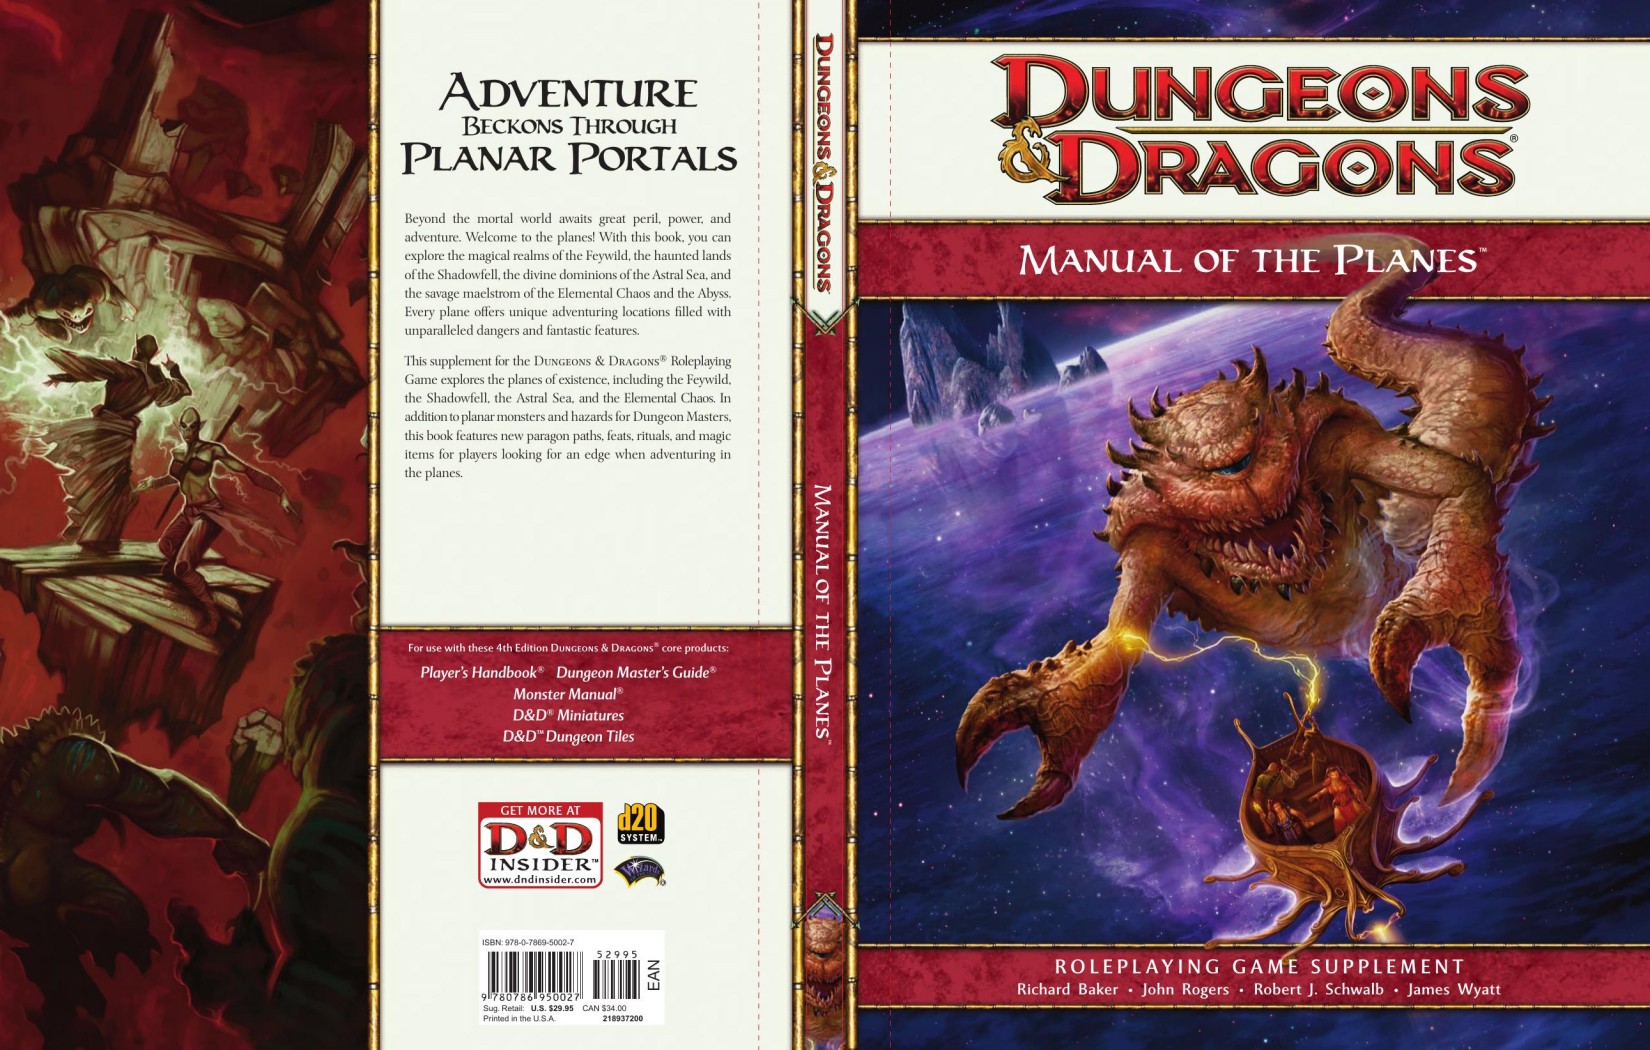 Dungeon & Dragons: Manual of the Planes, Roleplaying Game Supplement